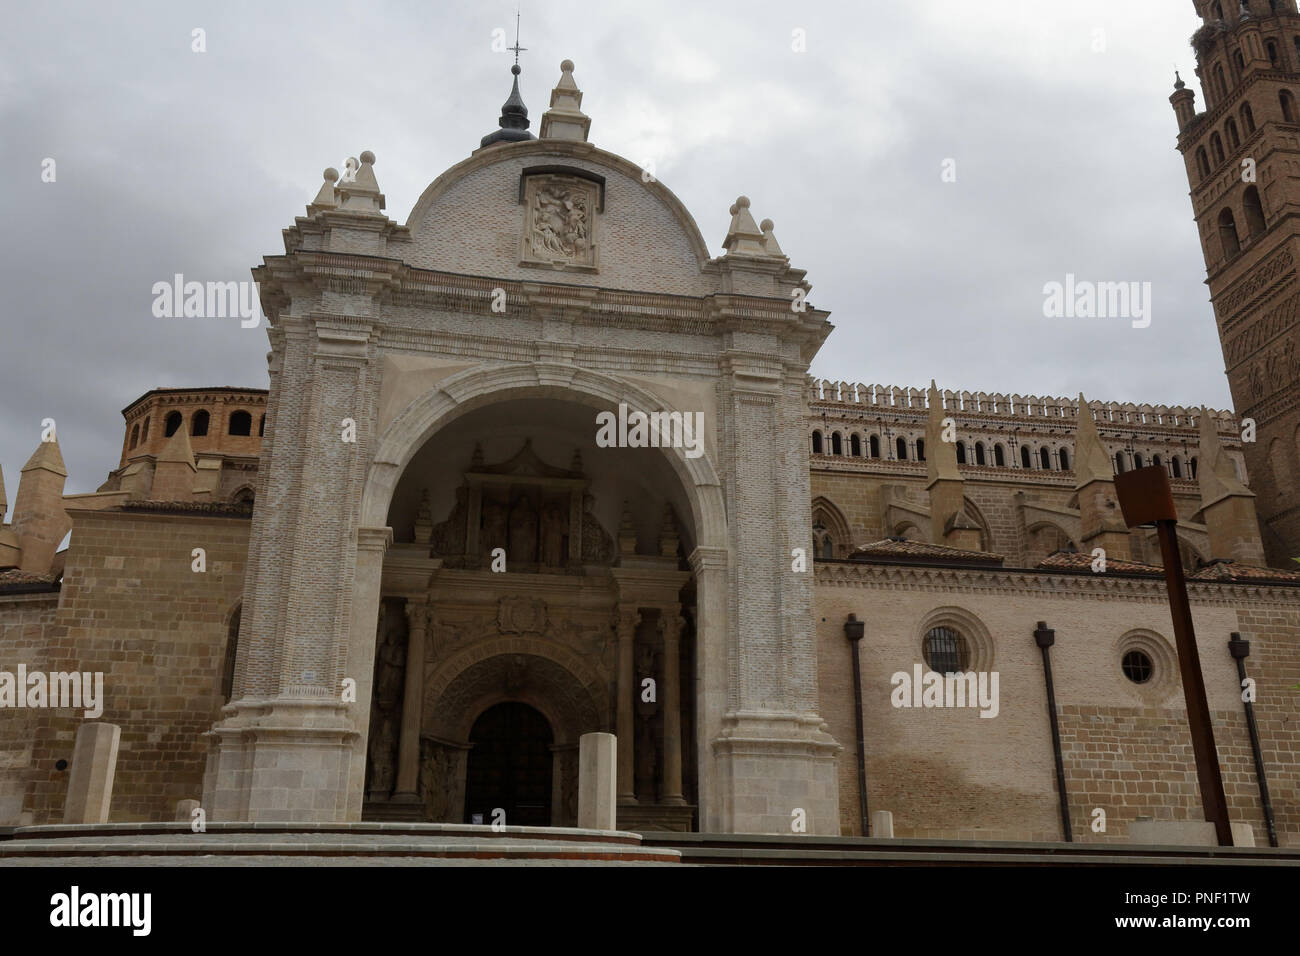 The Nuestra Señora de la Huerta gothic and mudejar cathedral facade, seen from the entrance staircase, in a cloudy, autumn day in Tarazona, Spain Stock Photo